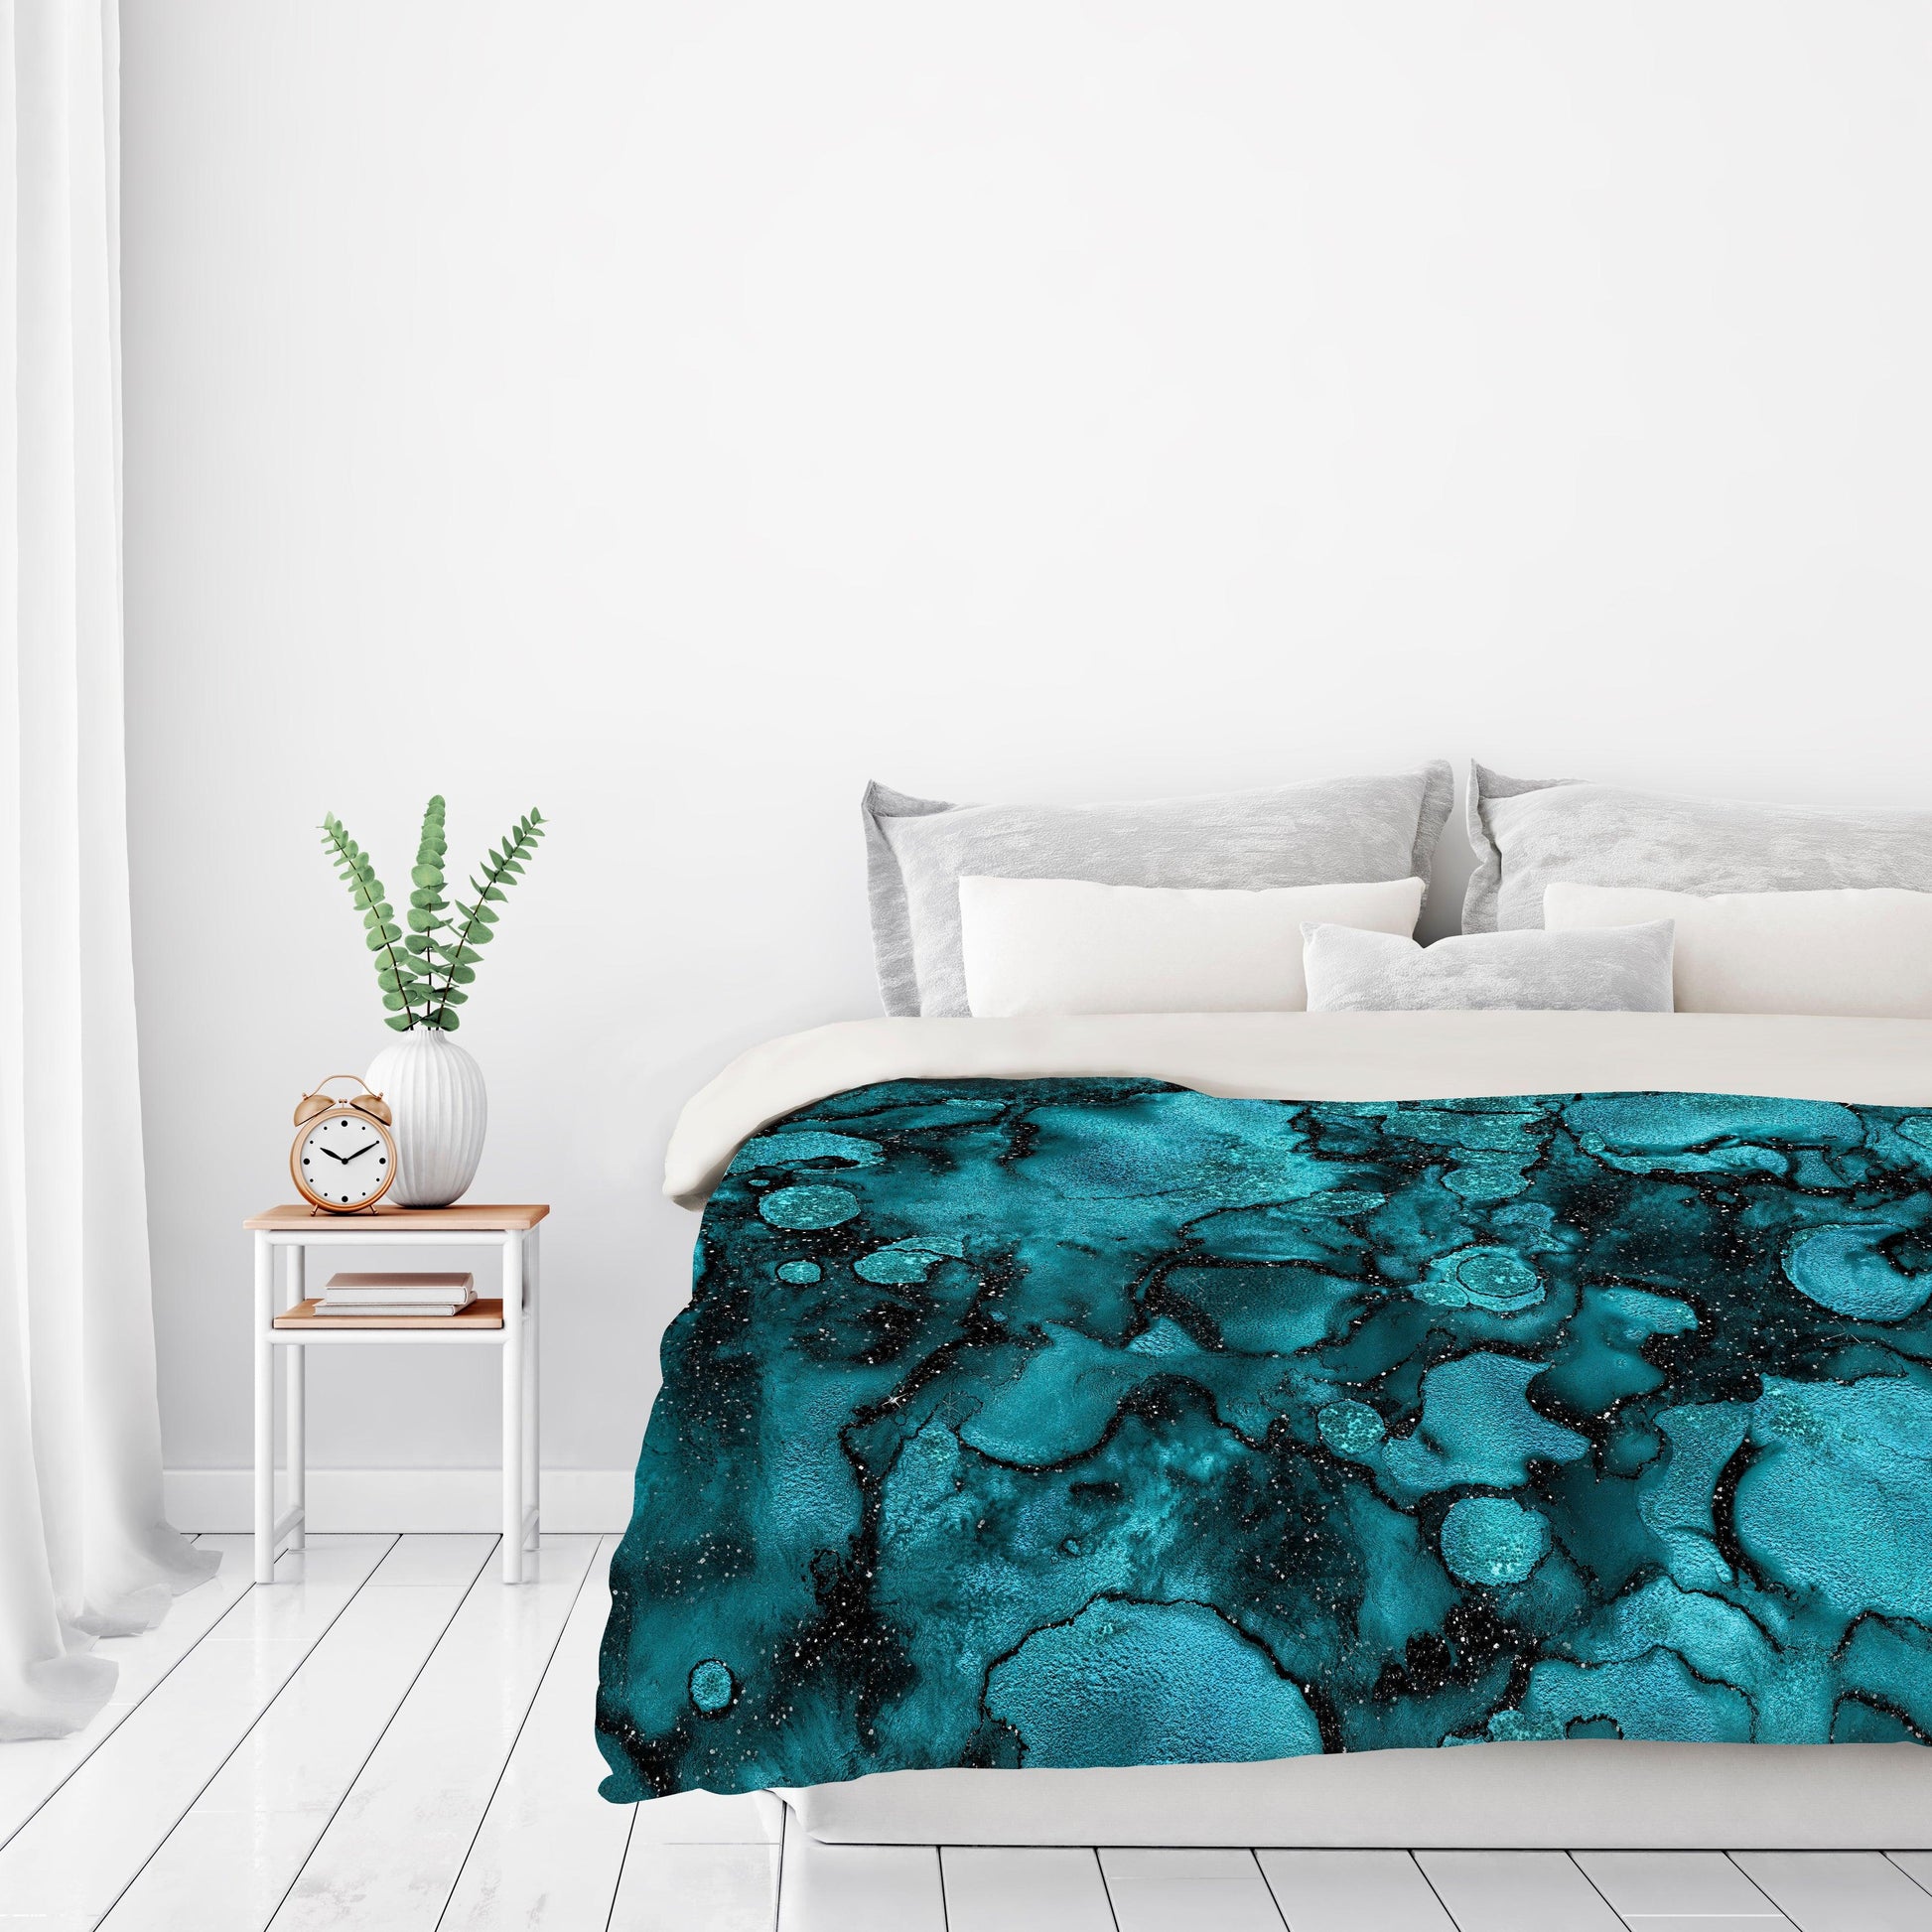 Shiny Blue Malachite Marble Agate With Glitter by Grab My Art Duvet Cover - Americanflat